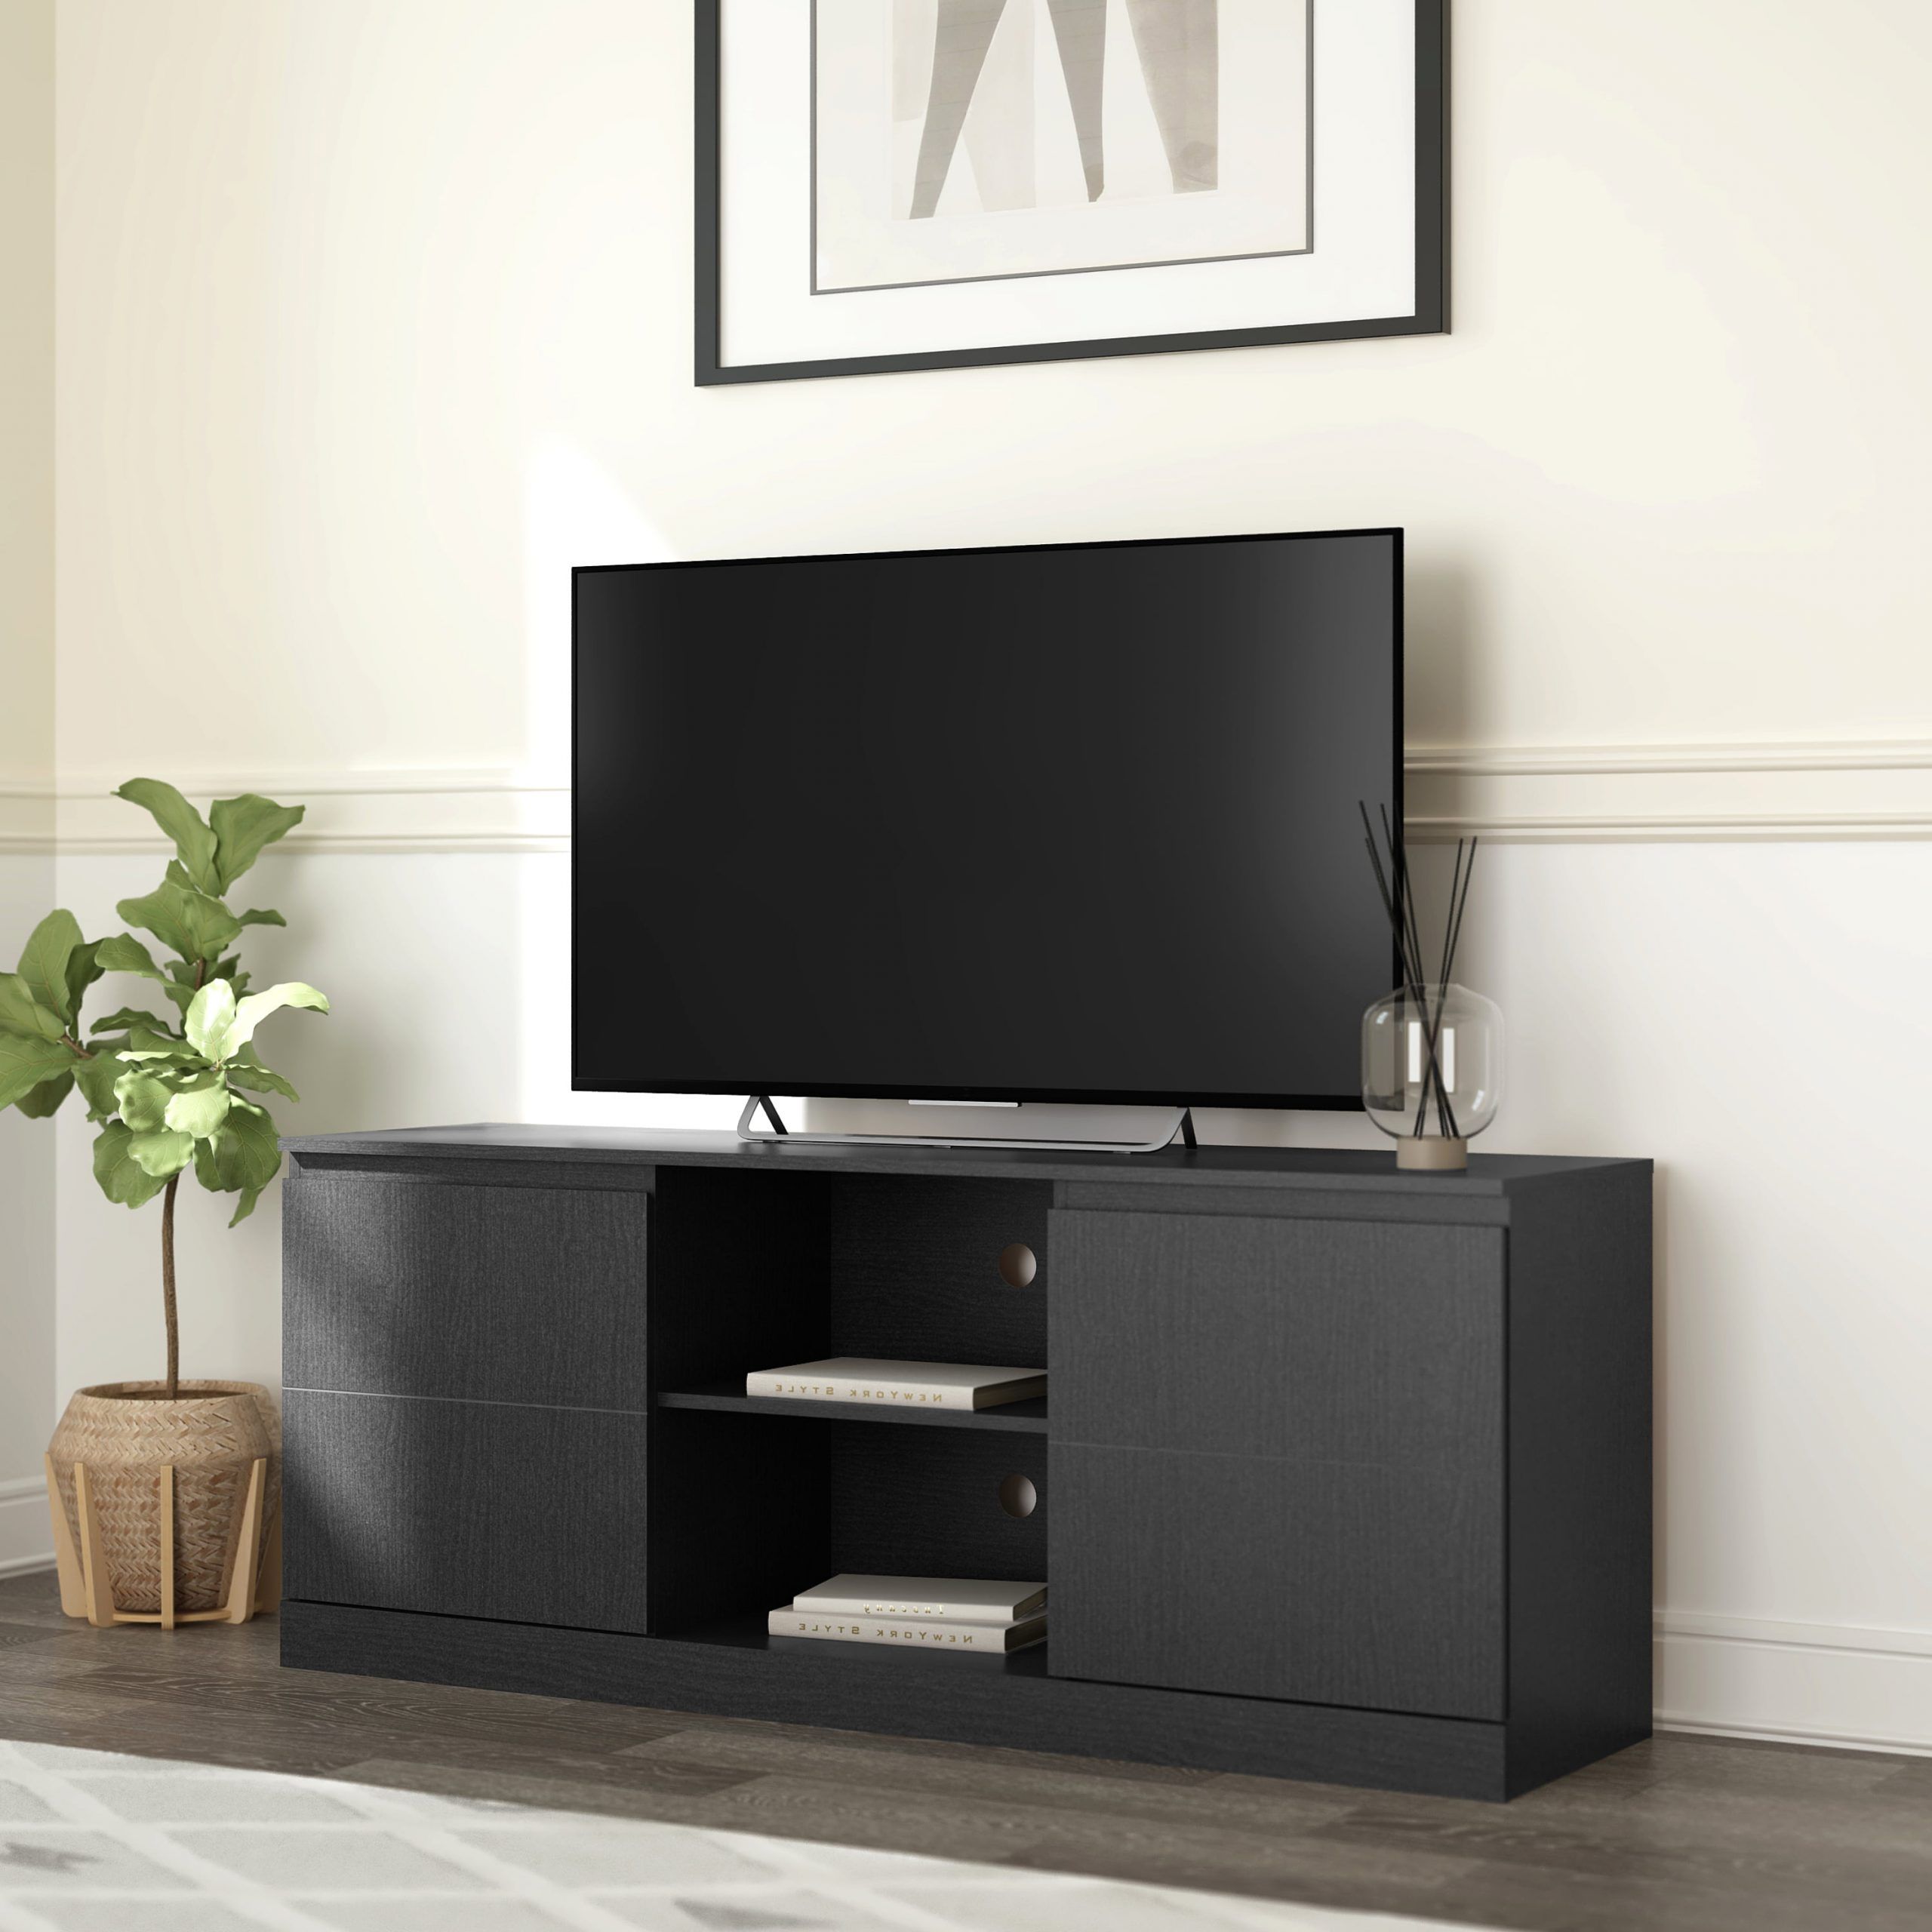 Brindle 60" Tv Stand With Charging Station For Tv's Up To 65", Black Oak –  Walmart For Most Up To Date Tv Stands With Charging Station (View 3 of 10)